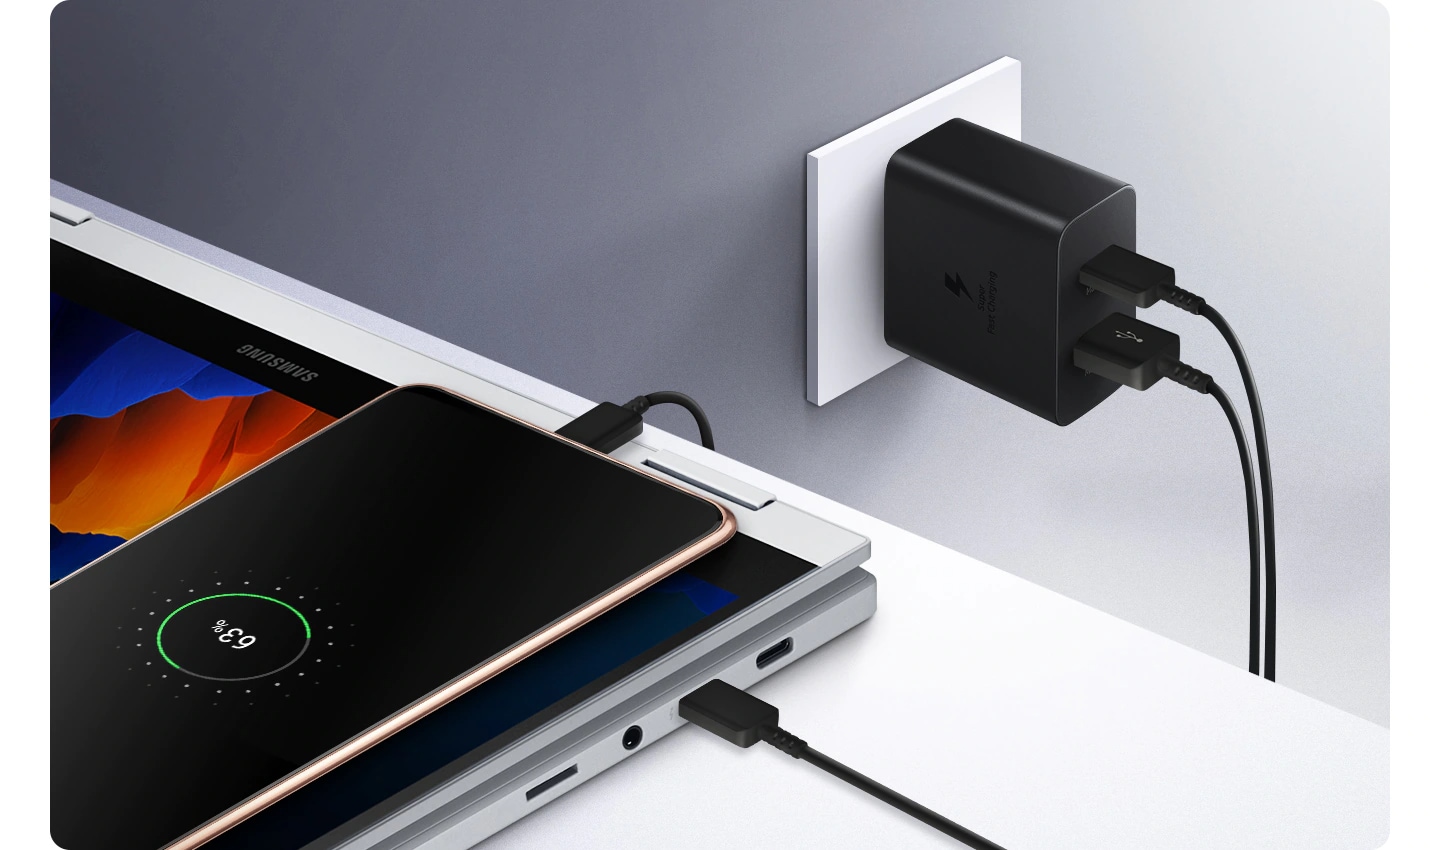 The dual-port charger powerful enough for simultaneous, high-output charging